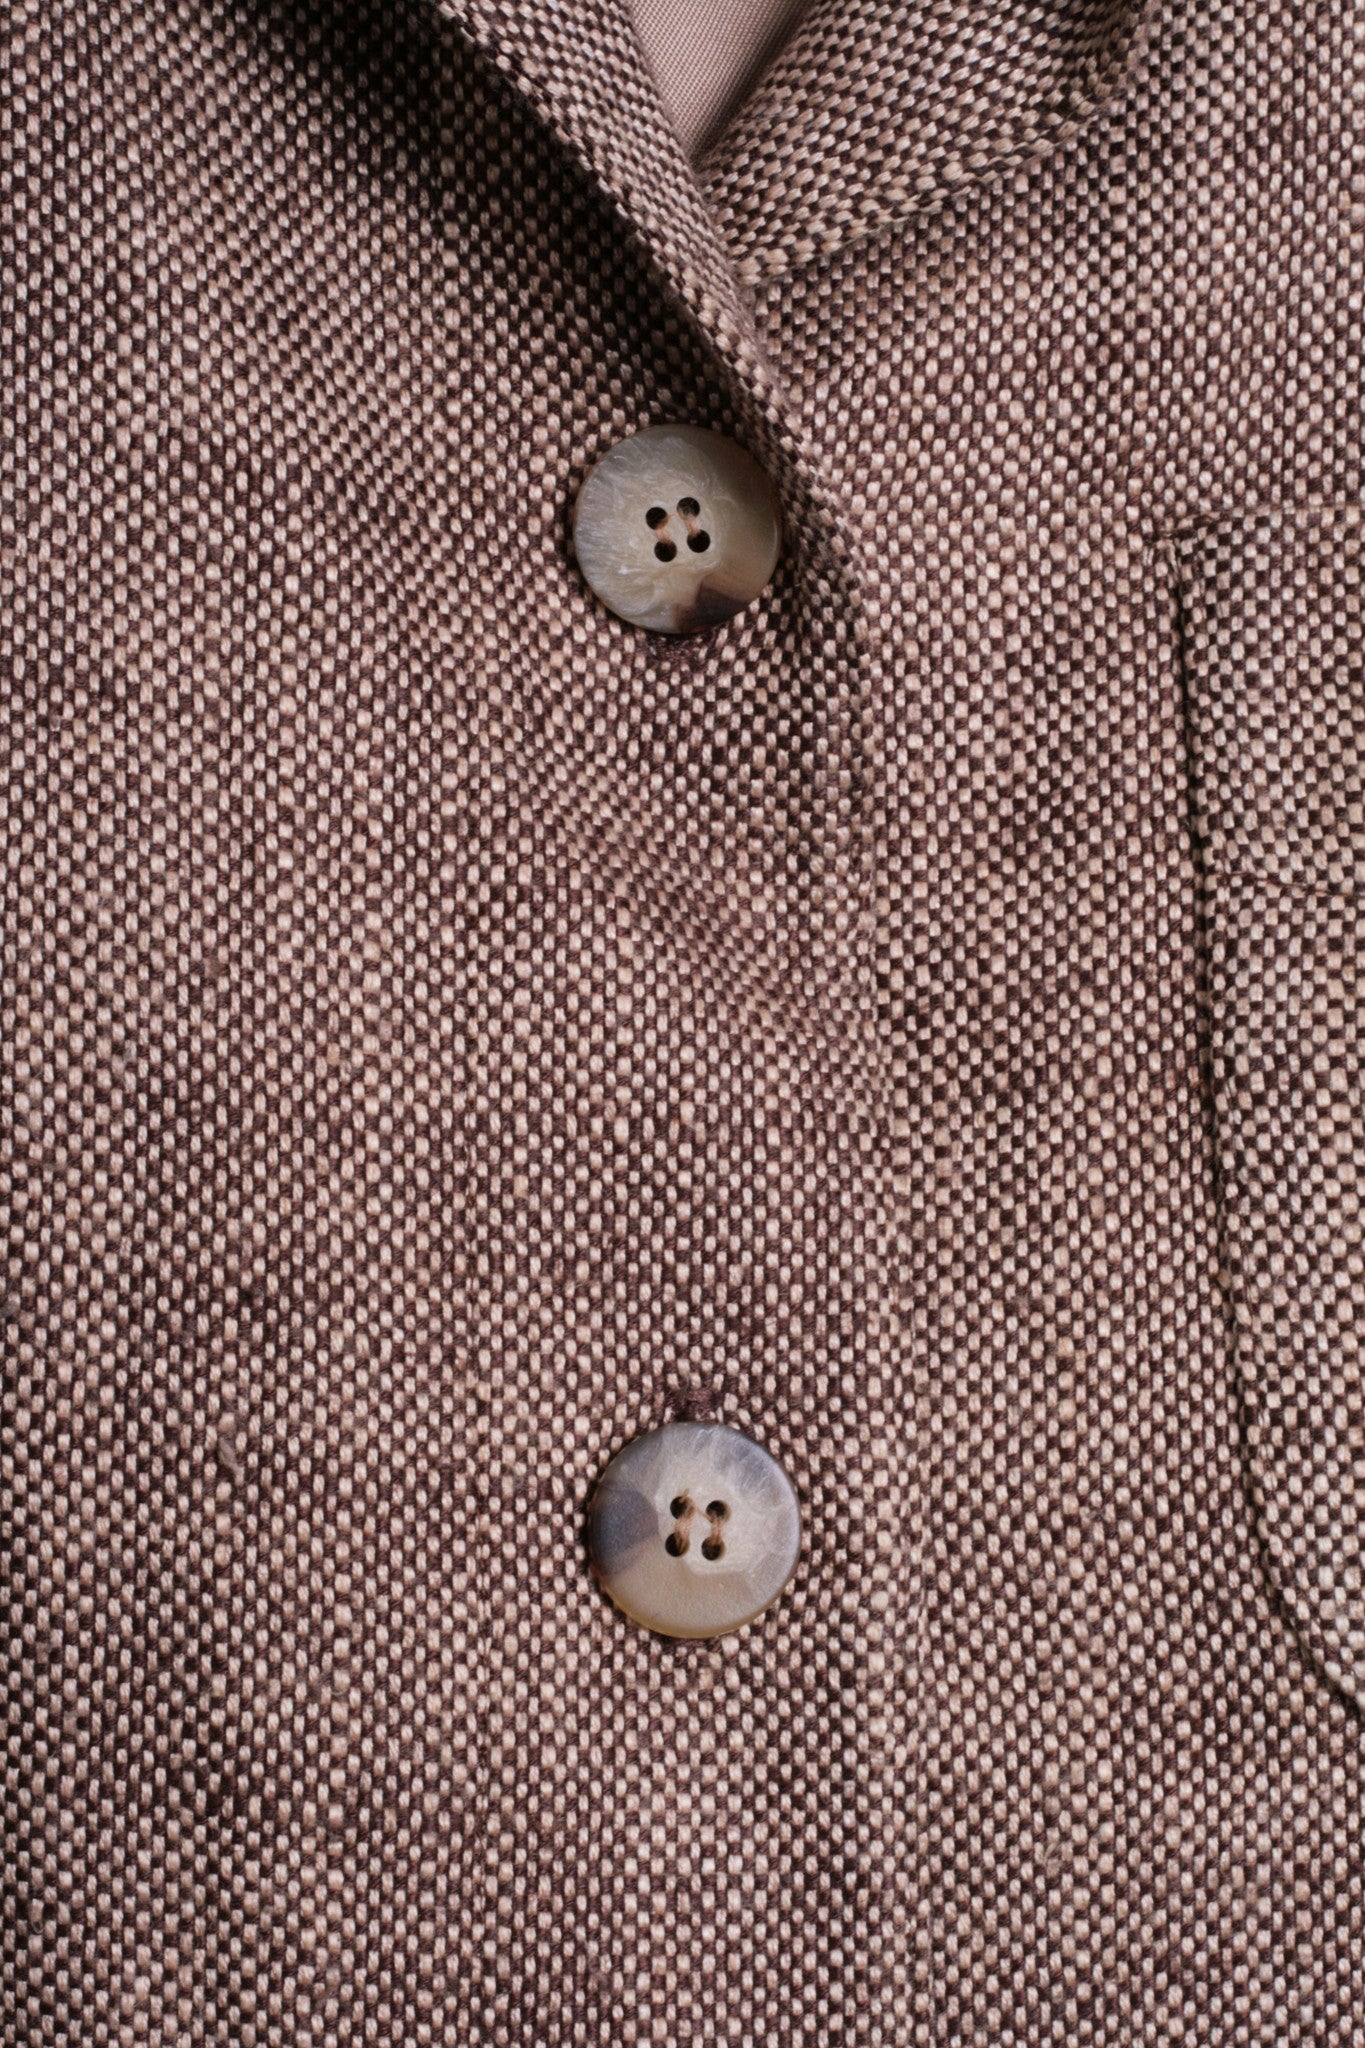 Orvis Womens 6 M Blazer Top Suit Brown Stand-Up Collar Single Breasted - RetrospectClothes